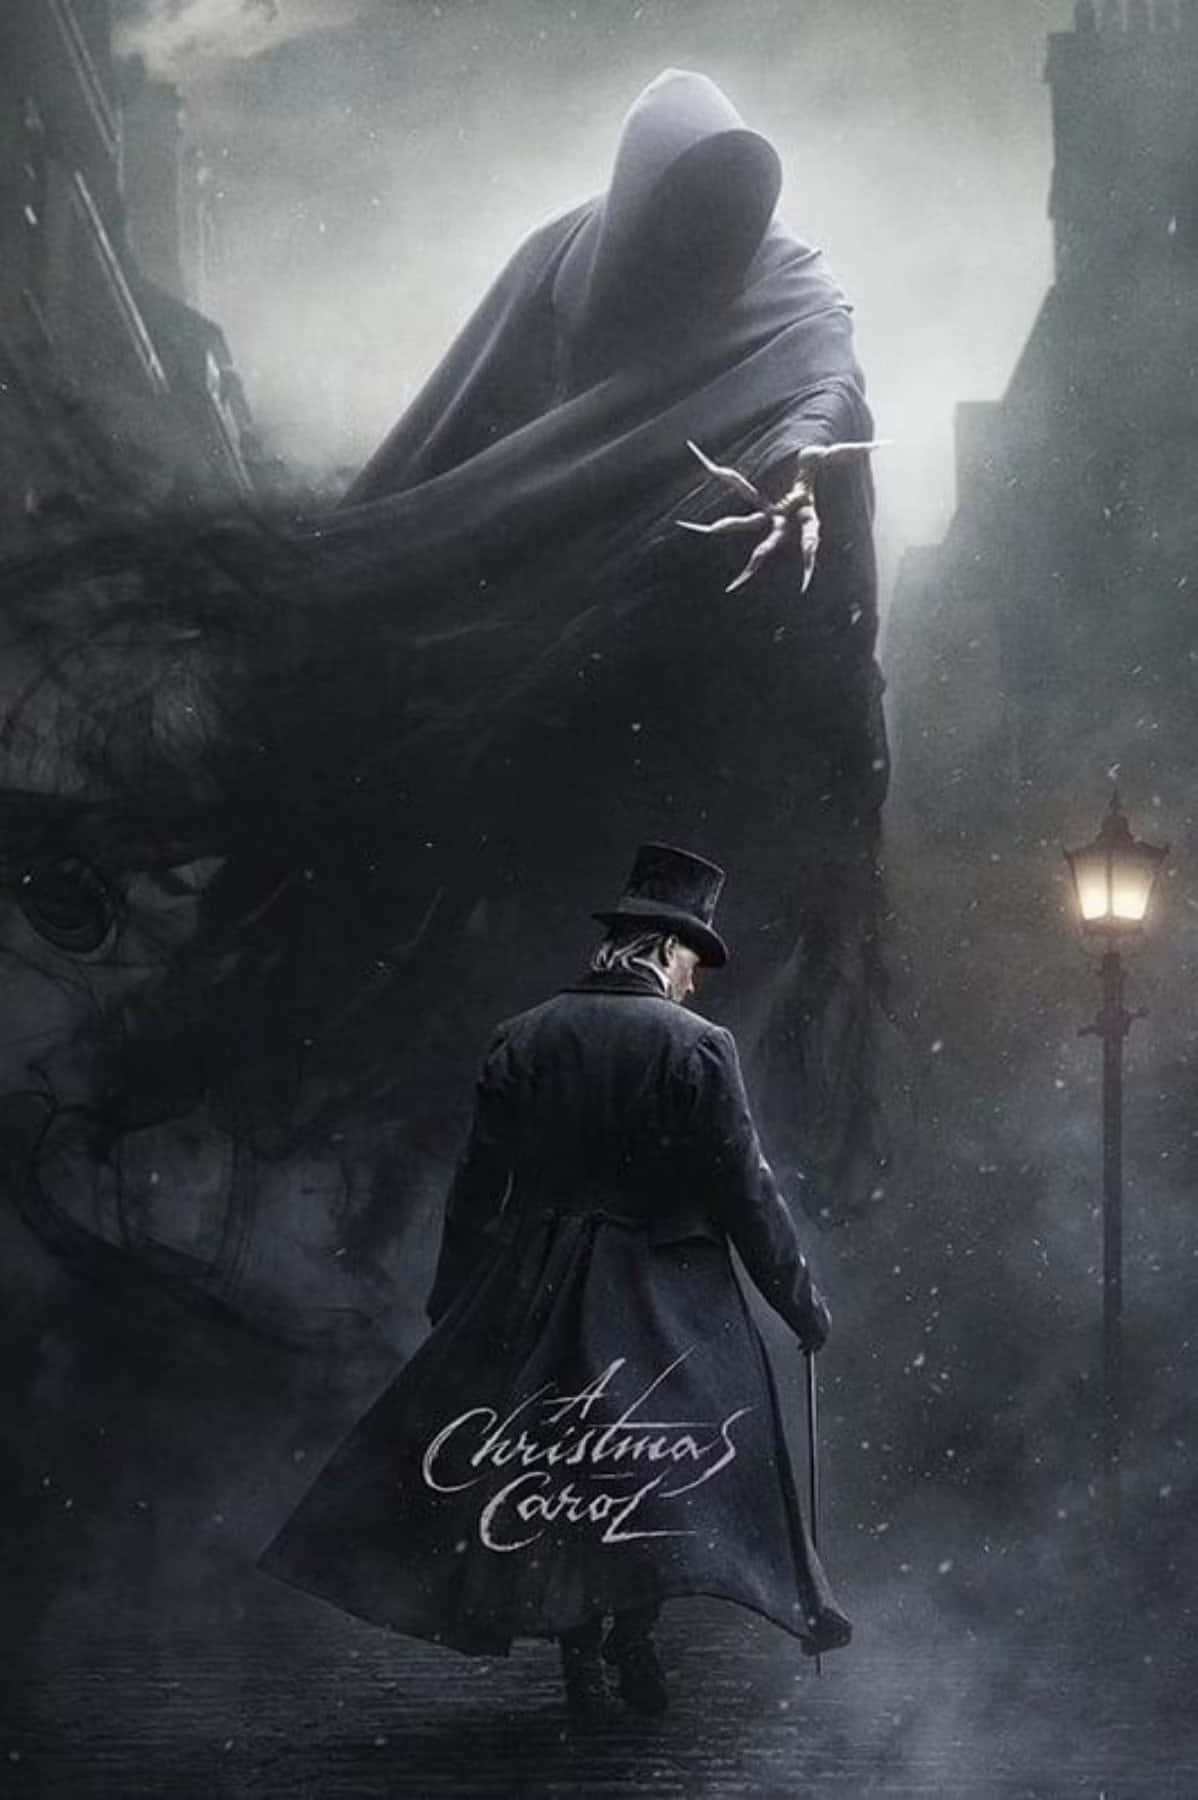 The Ghost of Christmas Past visits Scrooge in 'A Christmas Carol'